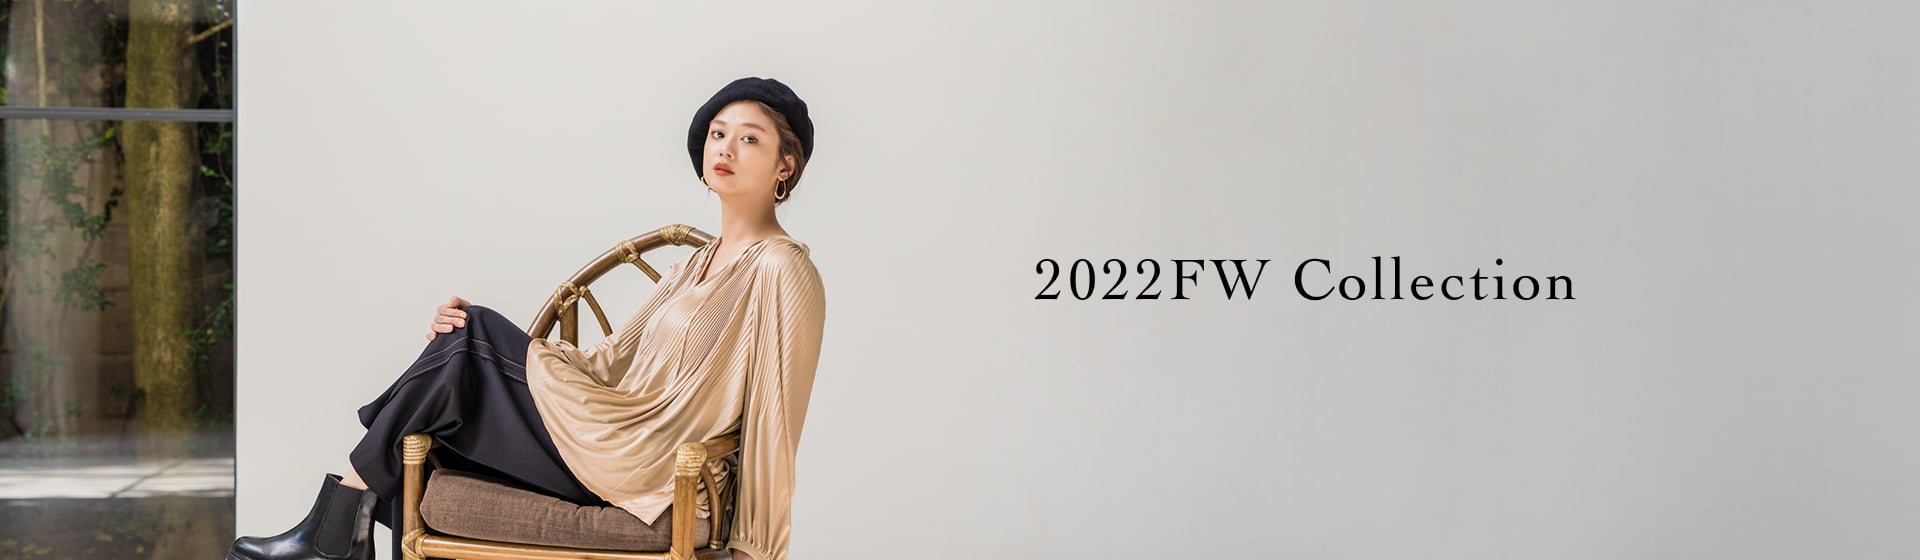 2022FW Collection